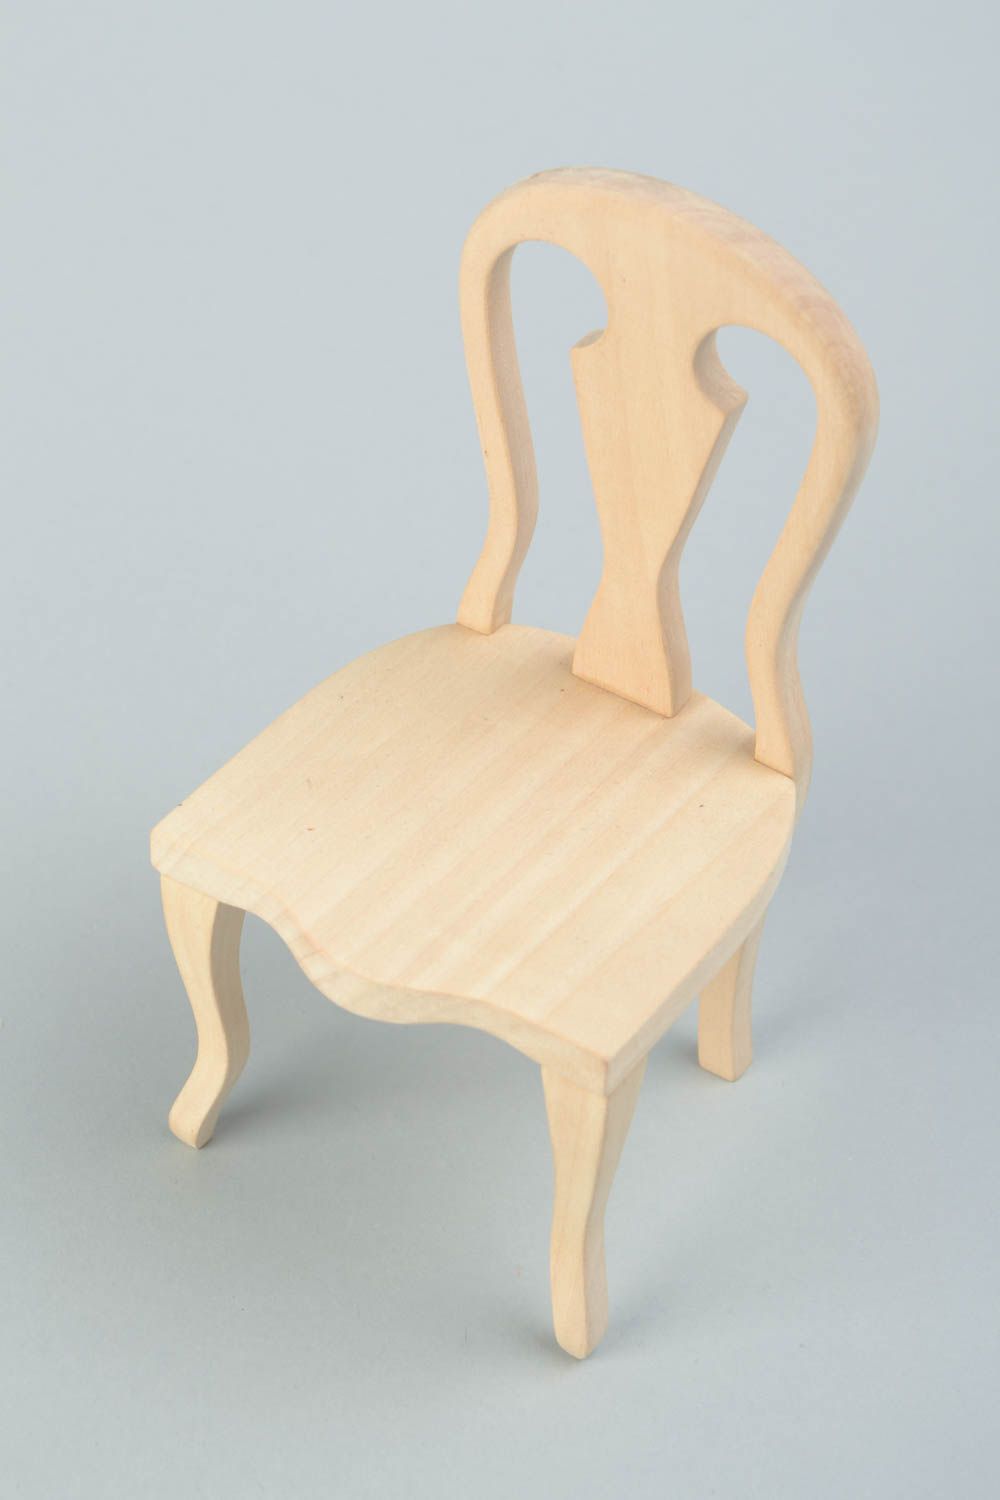 Handmade unfinished wooden doll furniture chair craft blank for creative work photo 1